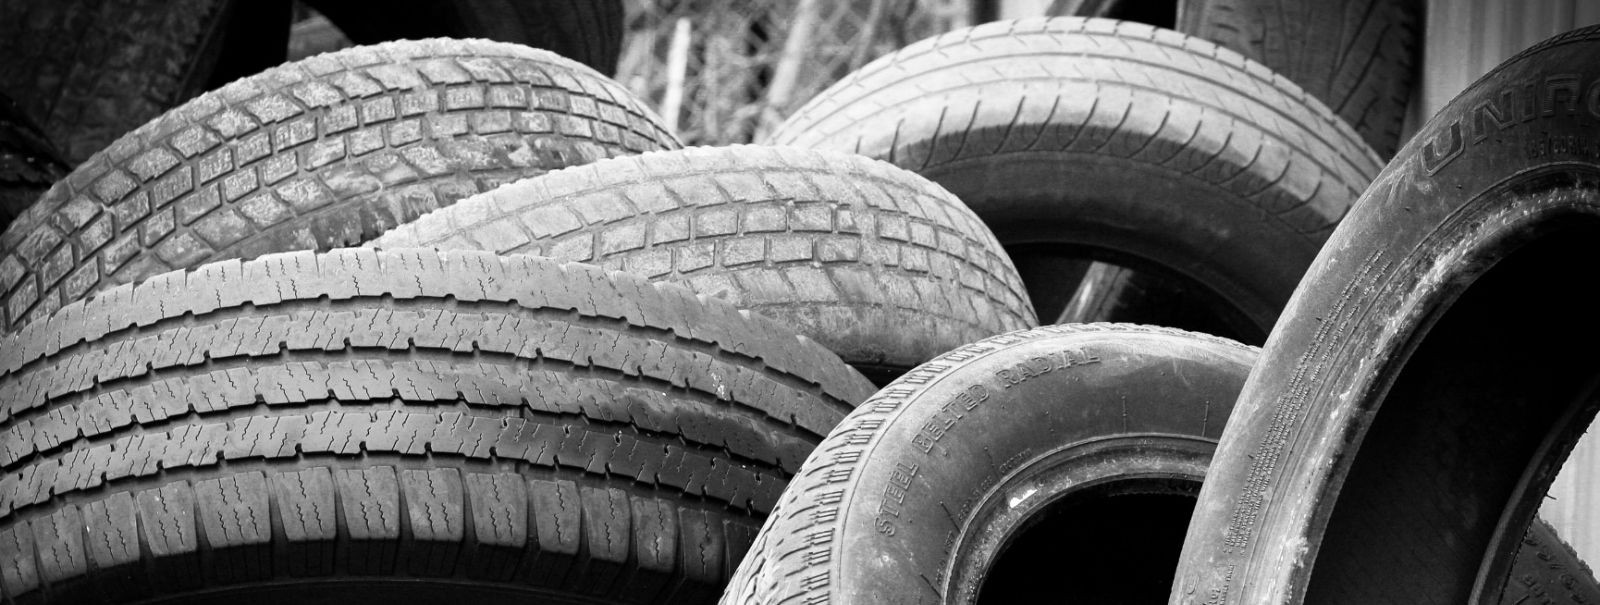 Choosing the right tires for your car begins with understanding the different types available. There are all-season tires, which are designed to perform well in